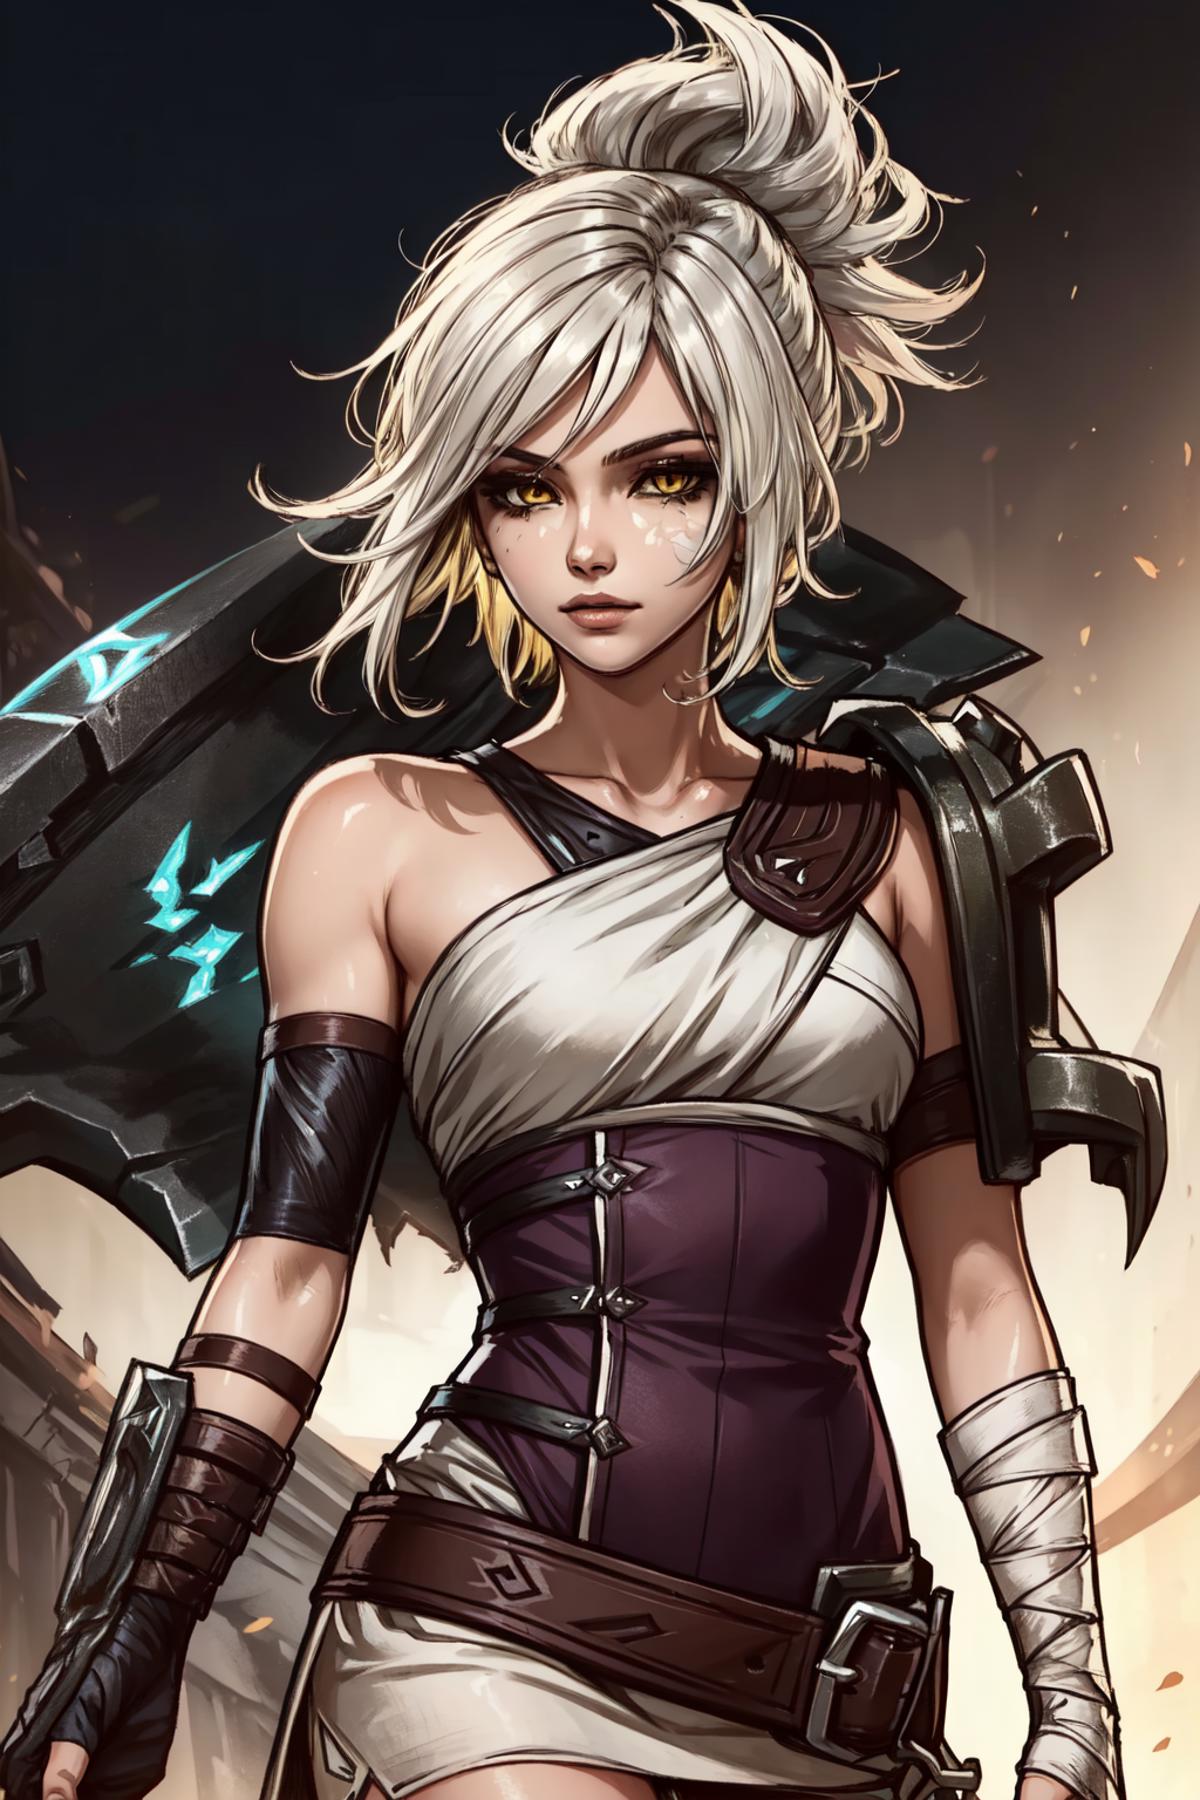 Riven | League of Legends image by Sedikit